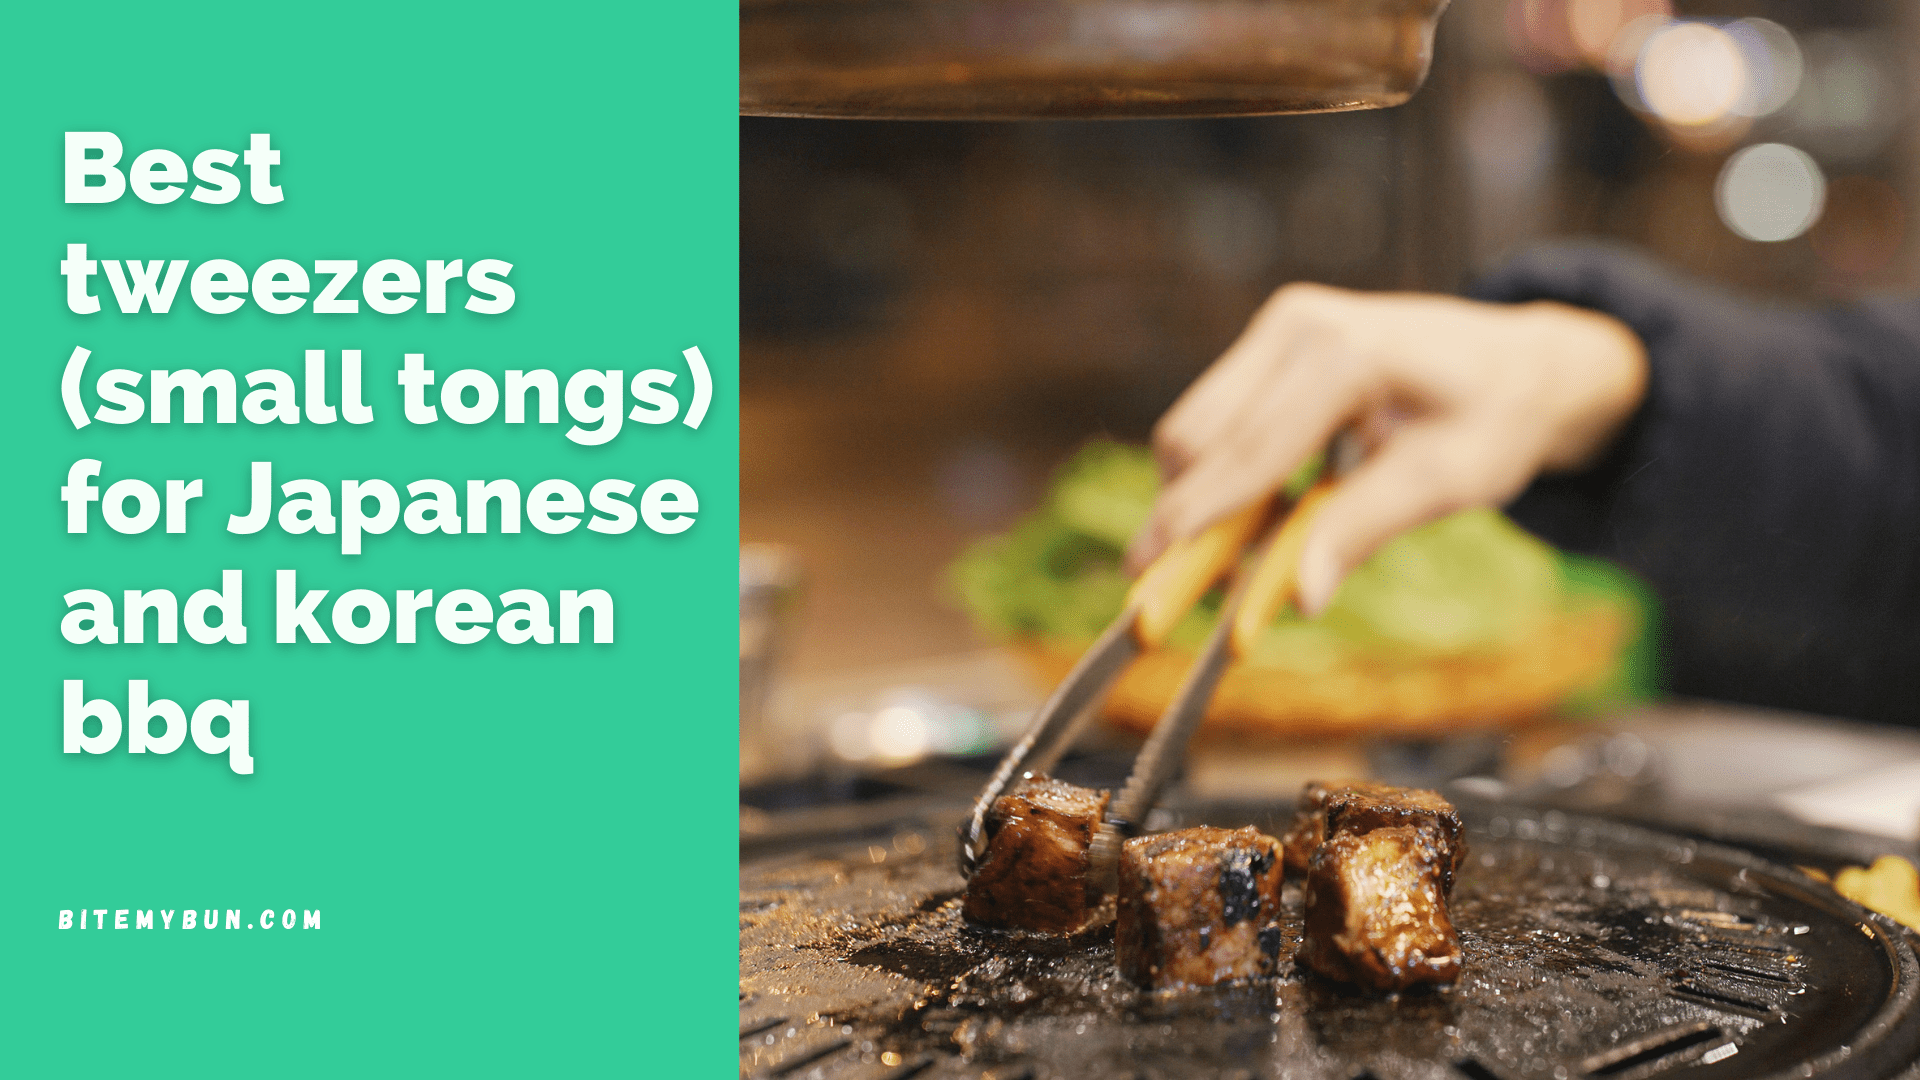 The best tweezers (small tongs) for Japanese and Korean BBQ reviewed [Top 4]